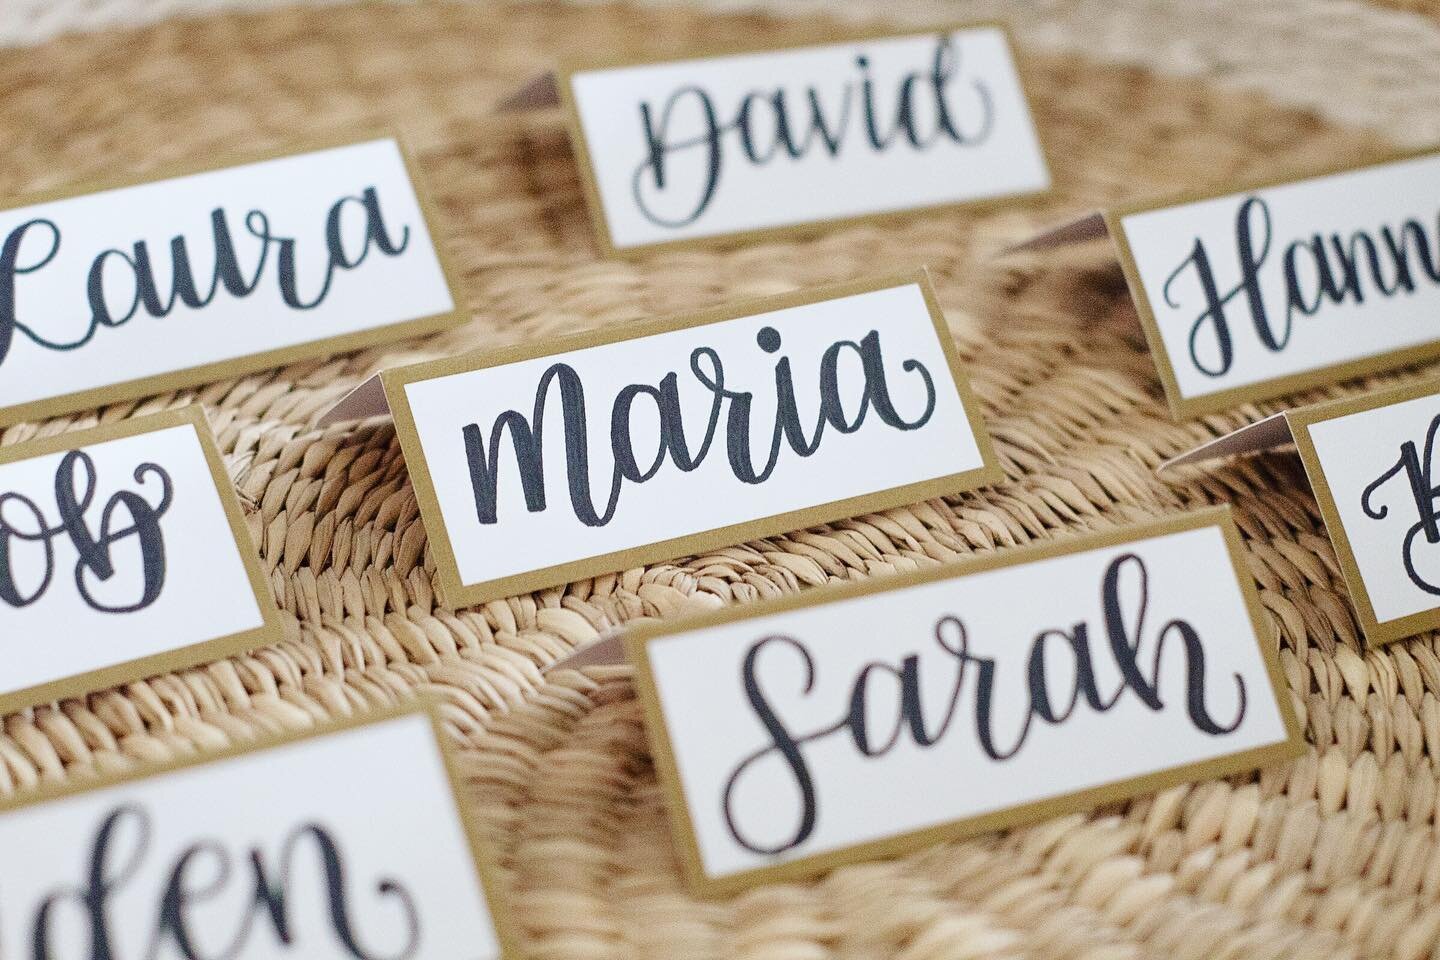 Elevate your special event to the next level by having calligraphy place cards! 🏷 

These are a reminder to your guests of how valuable their presence is at your event 💕

The amazing thing about calligraphy is that it can go beyond paper &amp; pen!